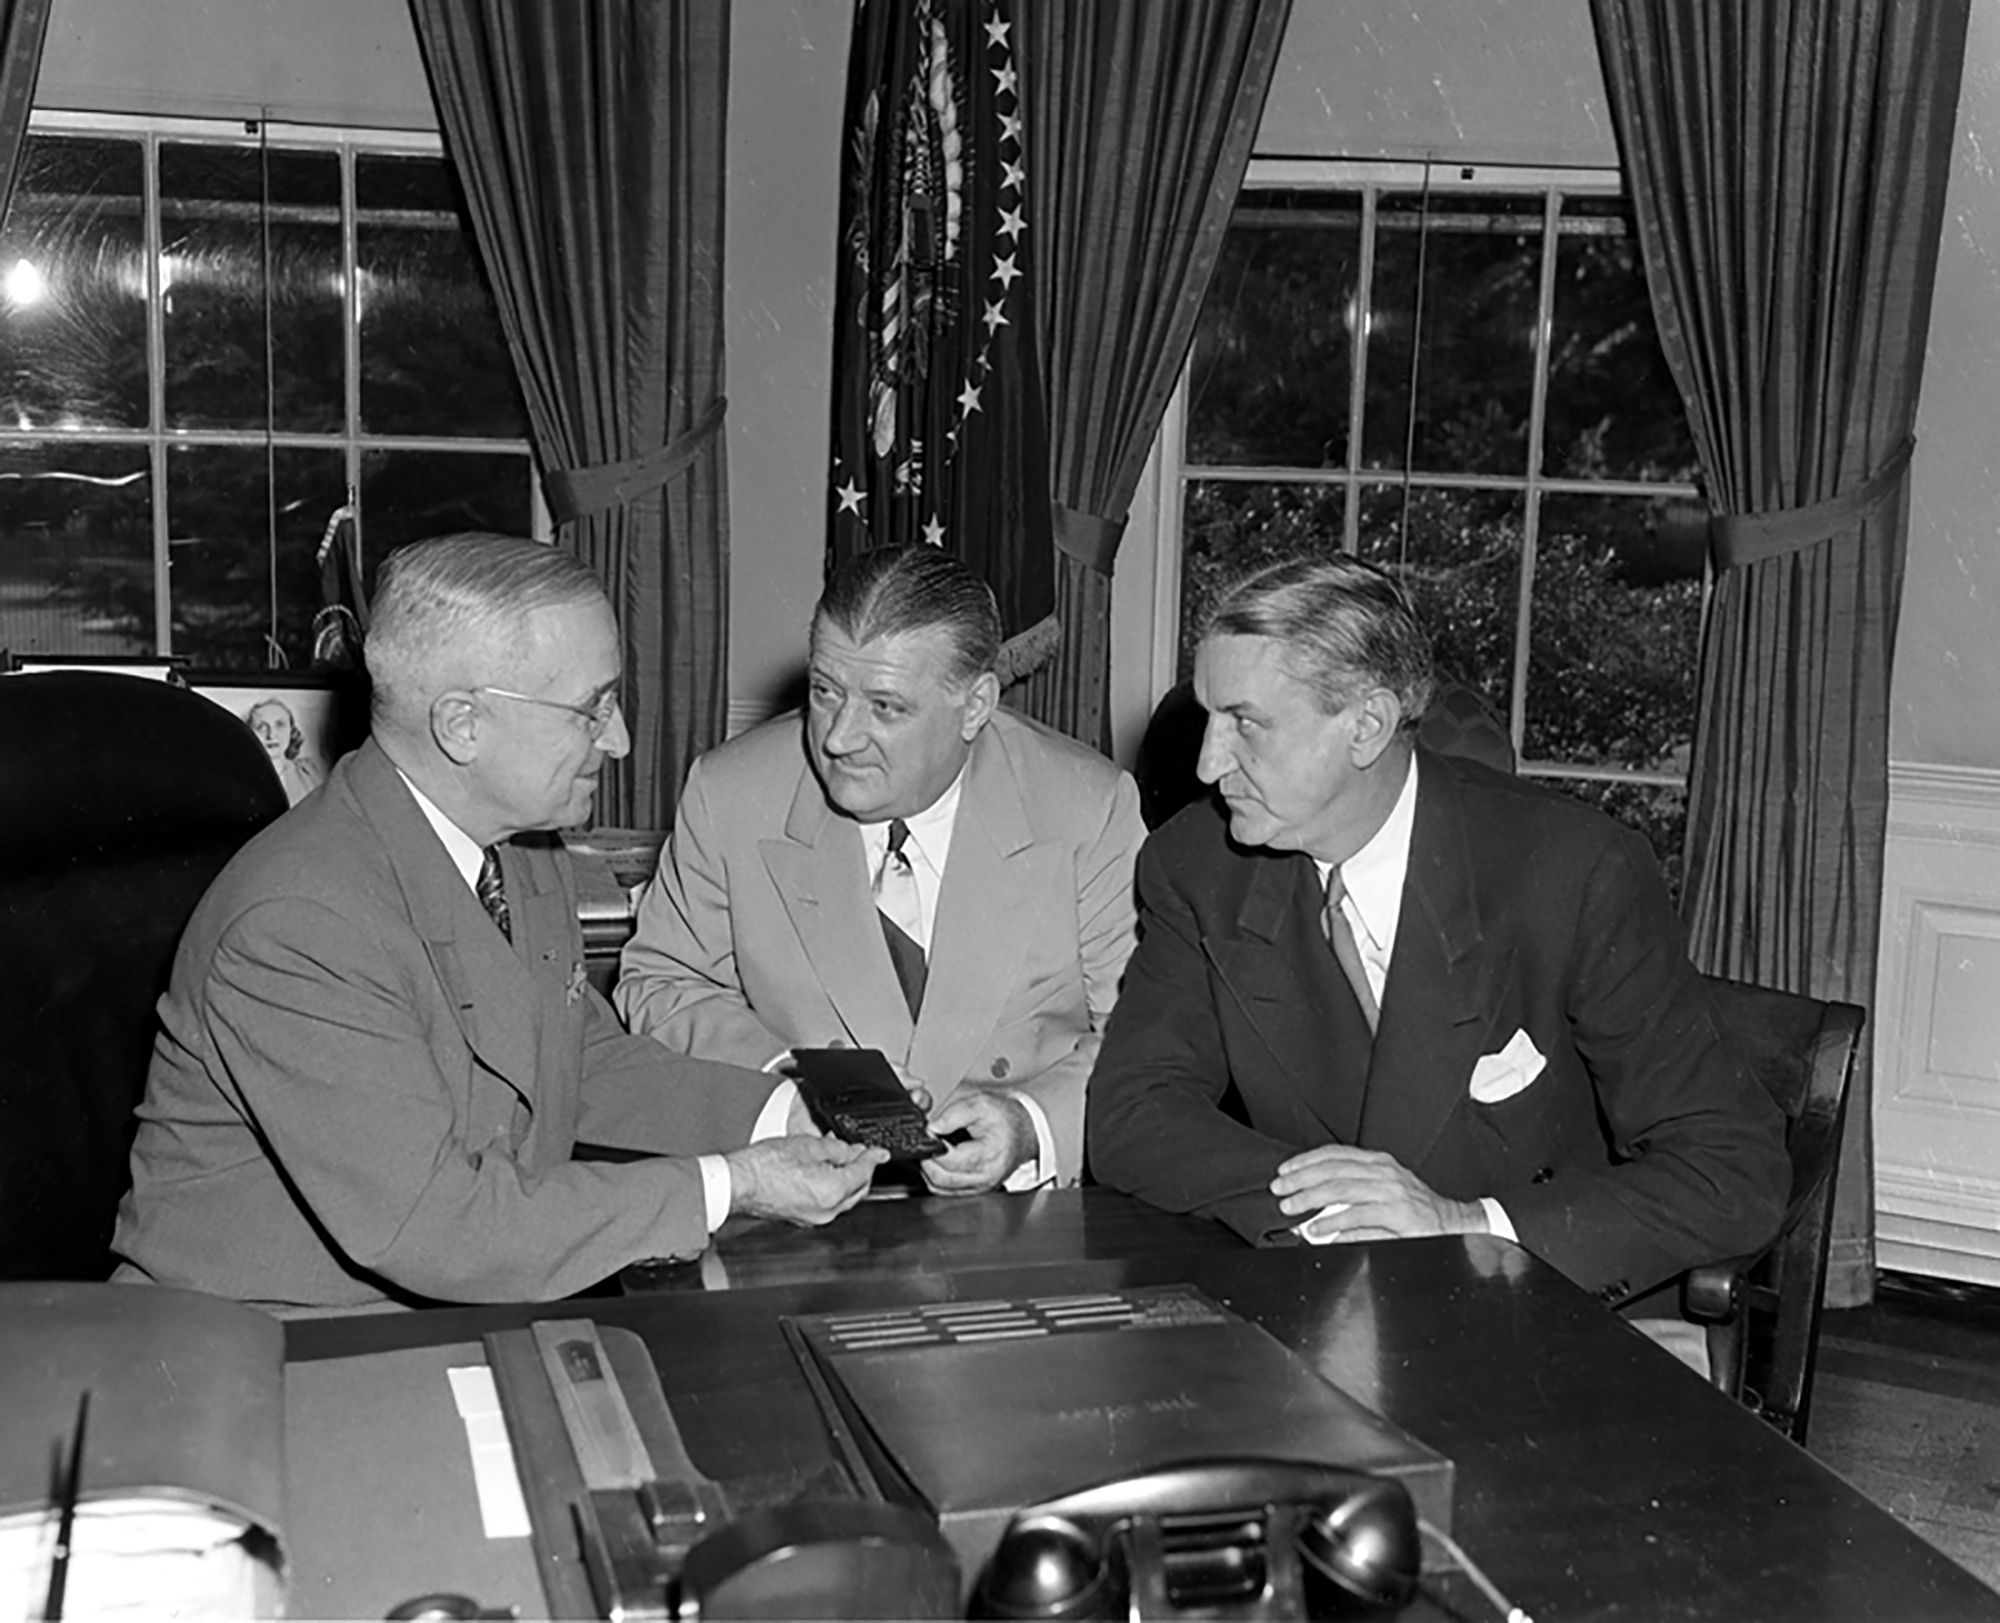 bert bell at the white house with truman